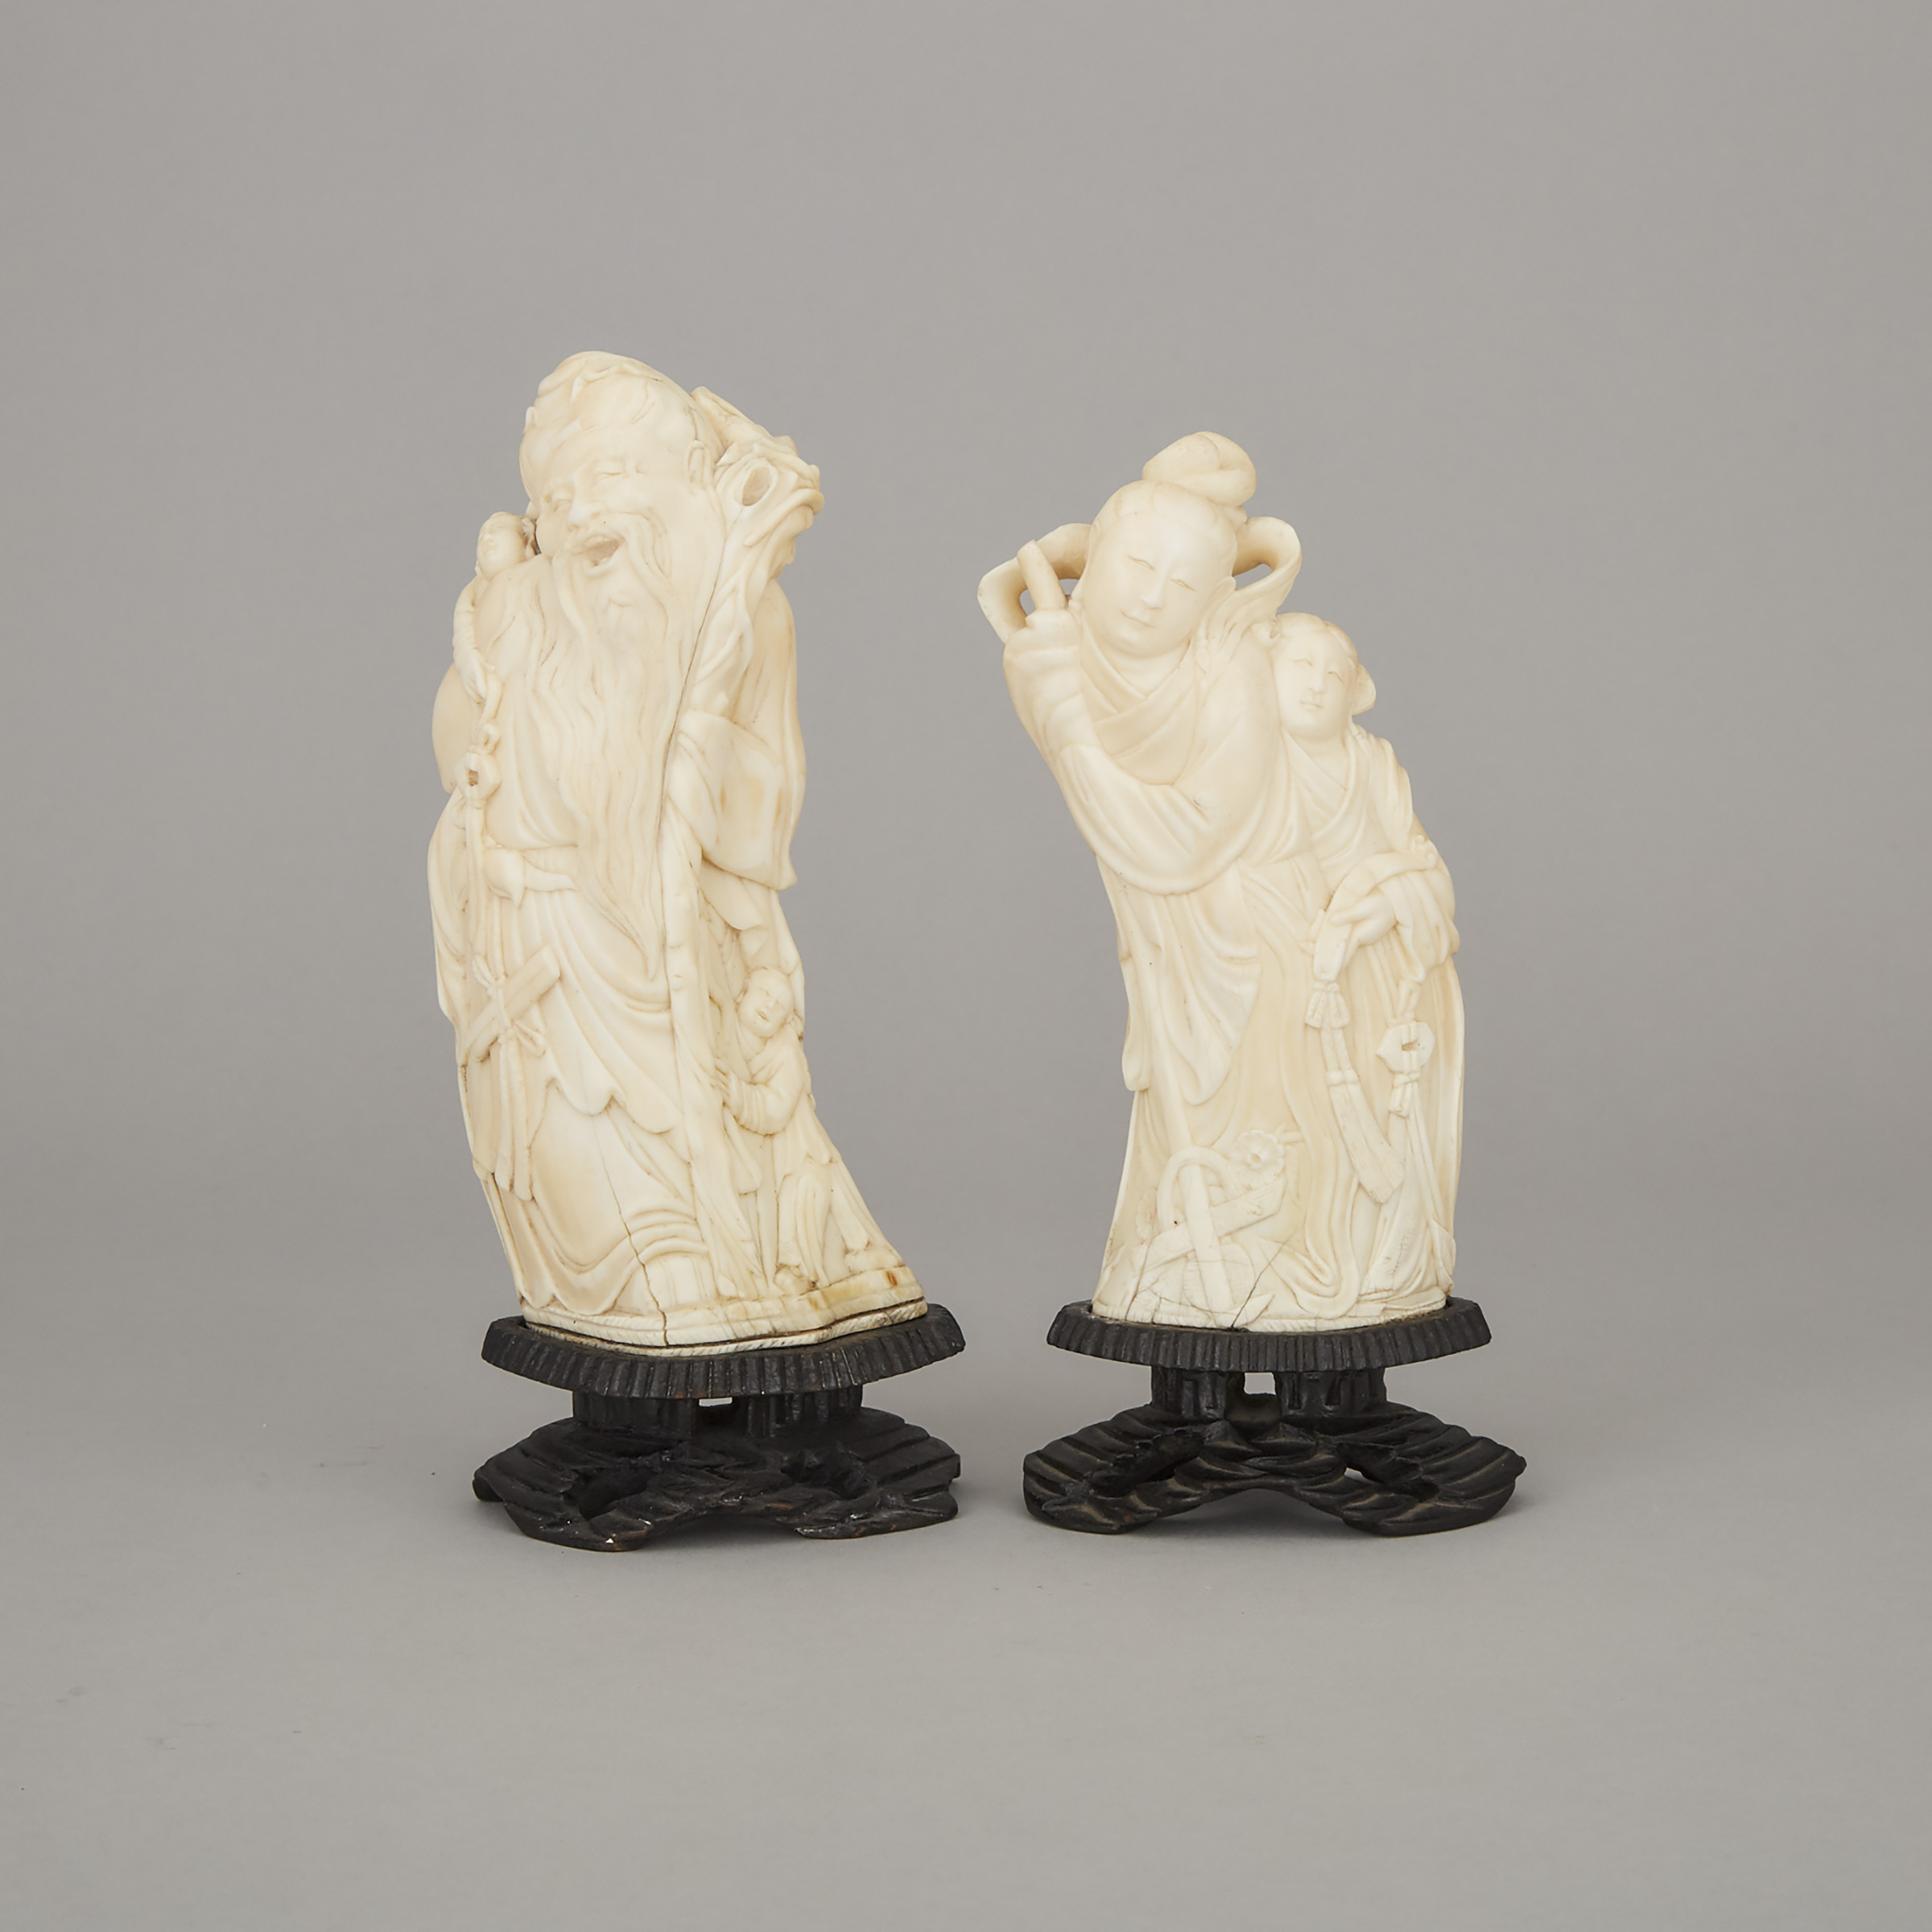 Two Chinese Ivory Carved Figures of Lin Daiyu and Shoulao, Late Qing/Early Republican